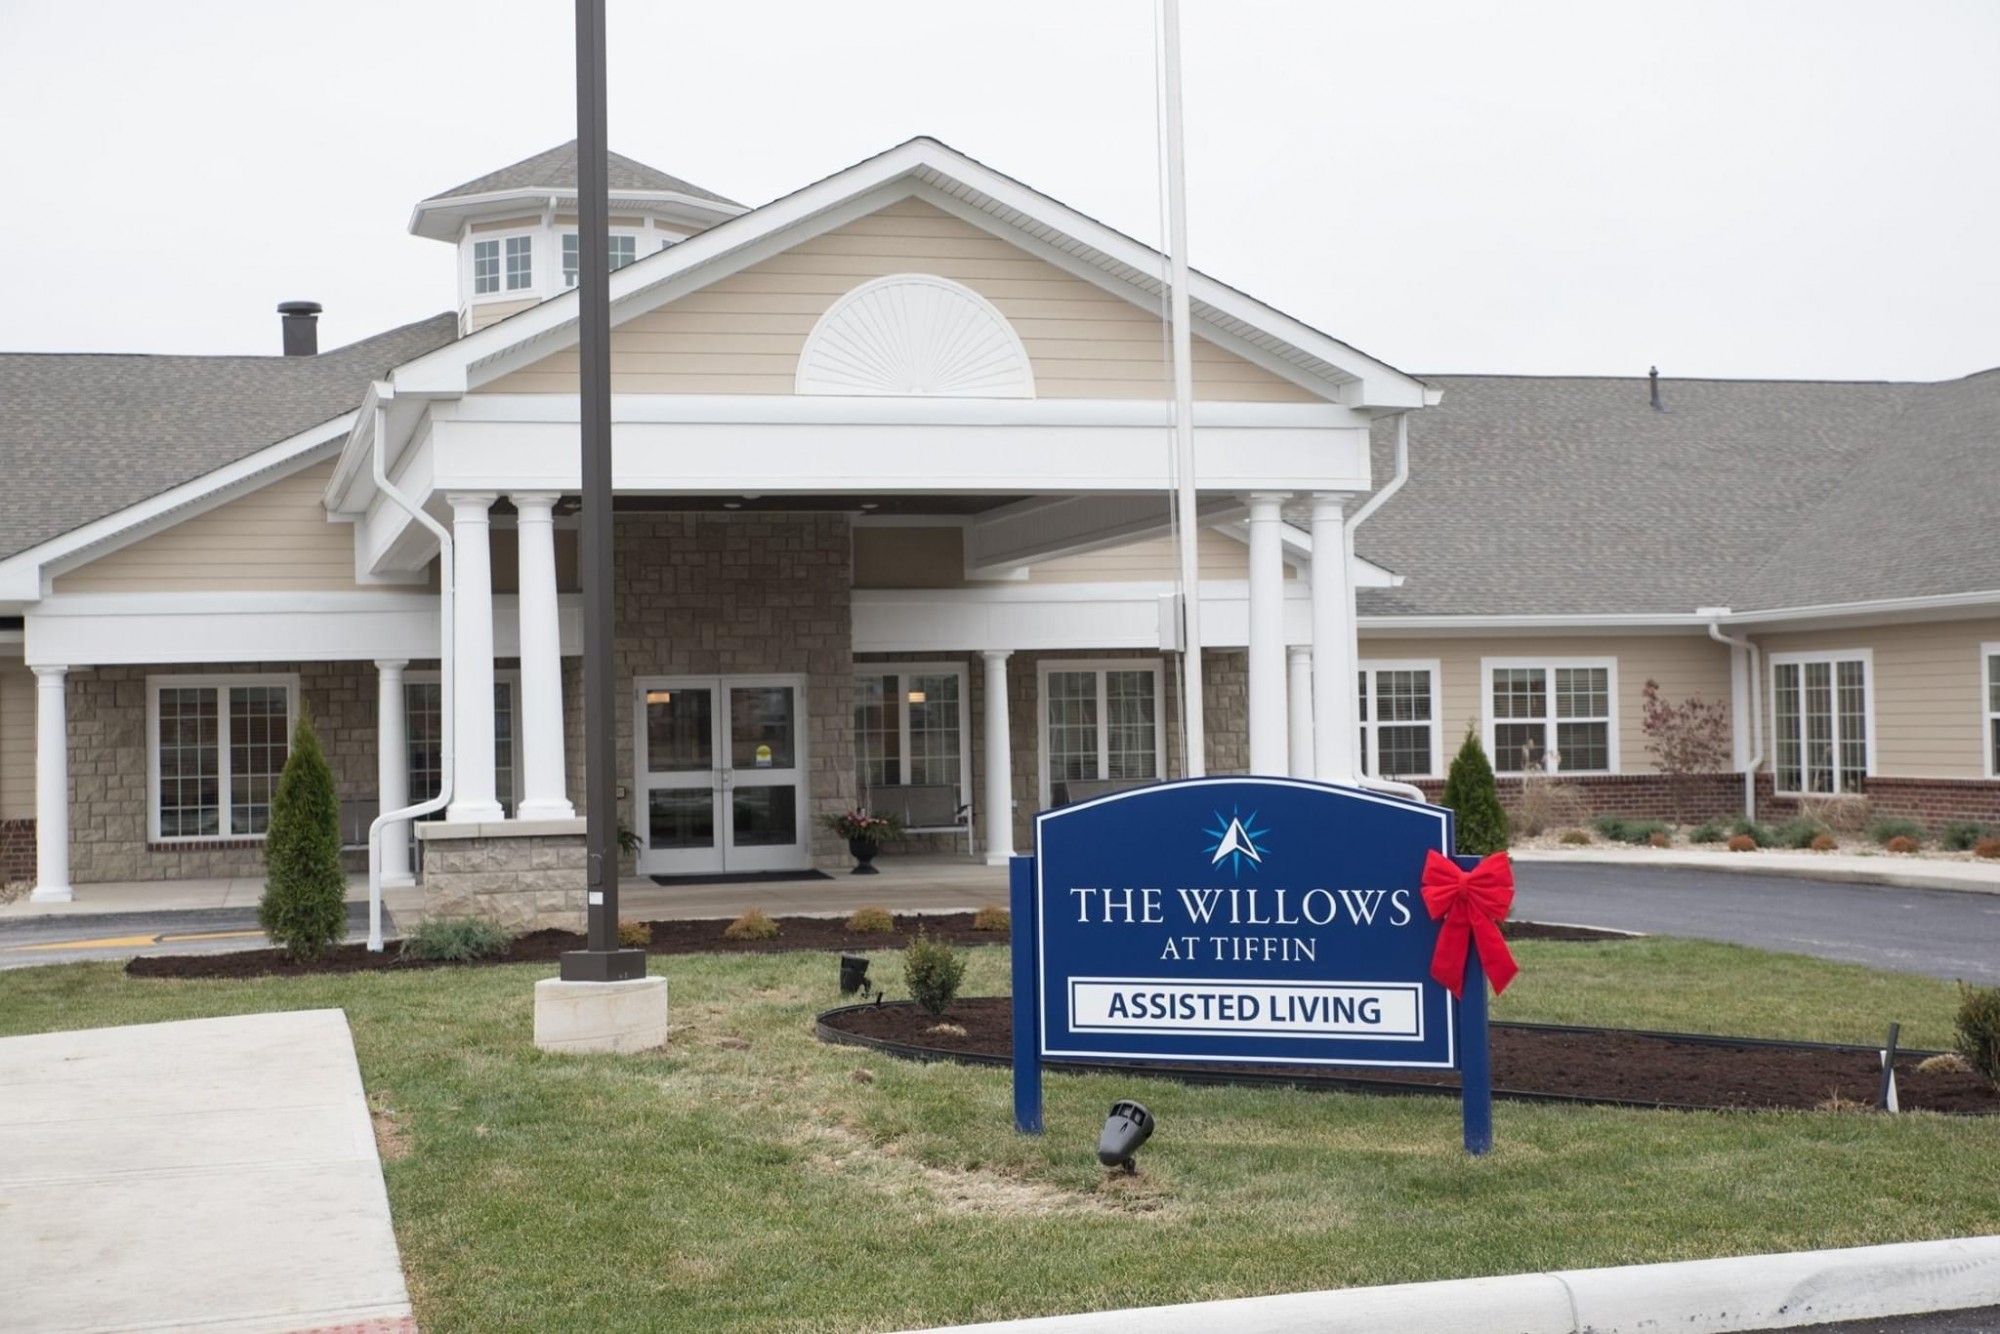 The Willows At Tiffin Receives Top Award for Outstanding Customer Service